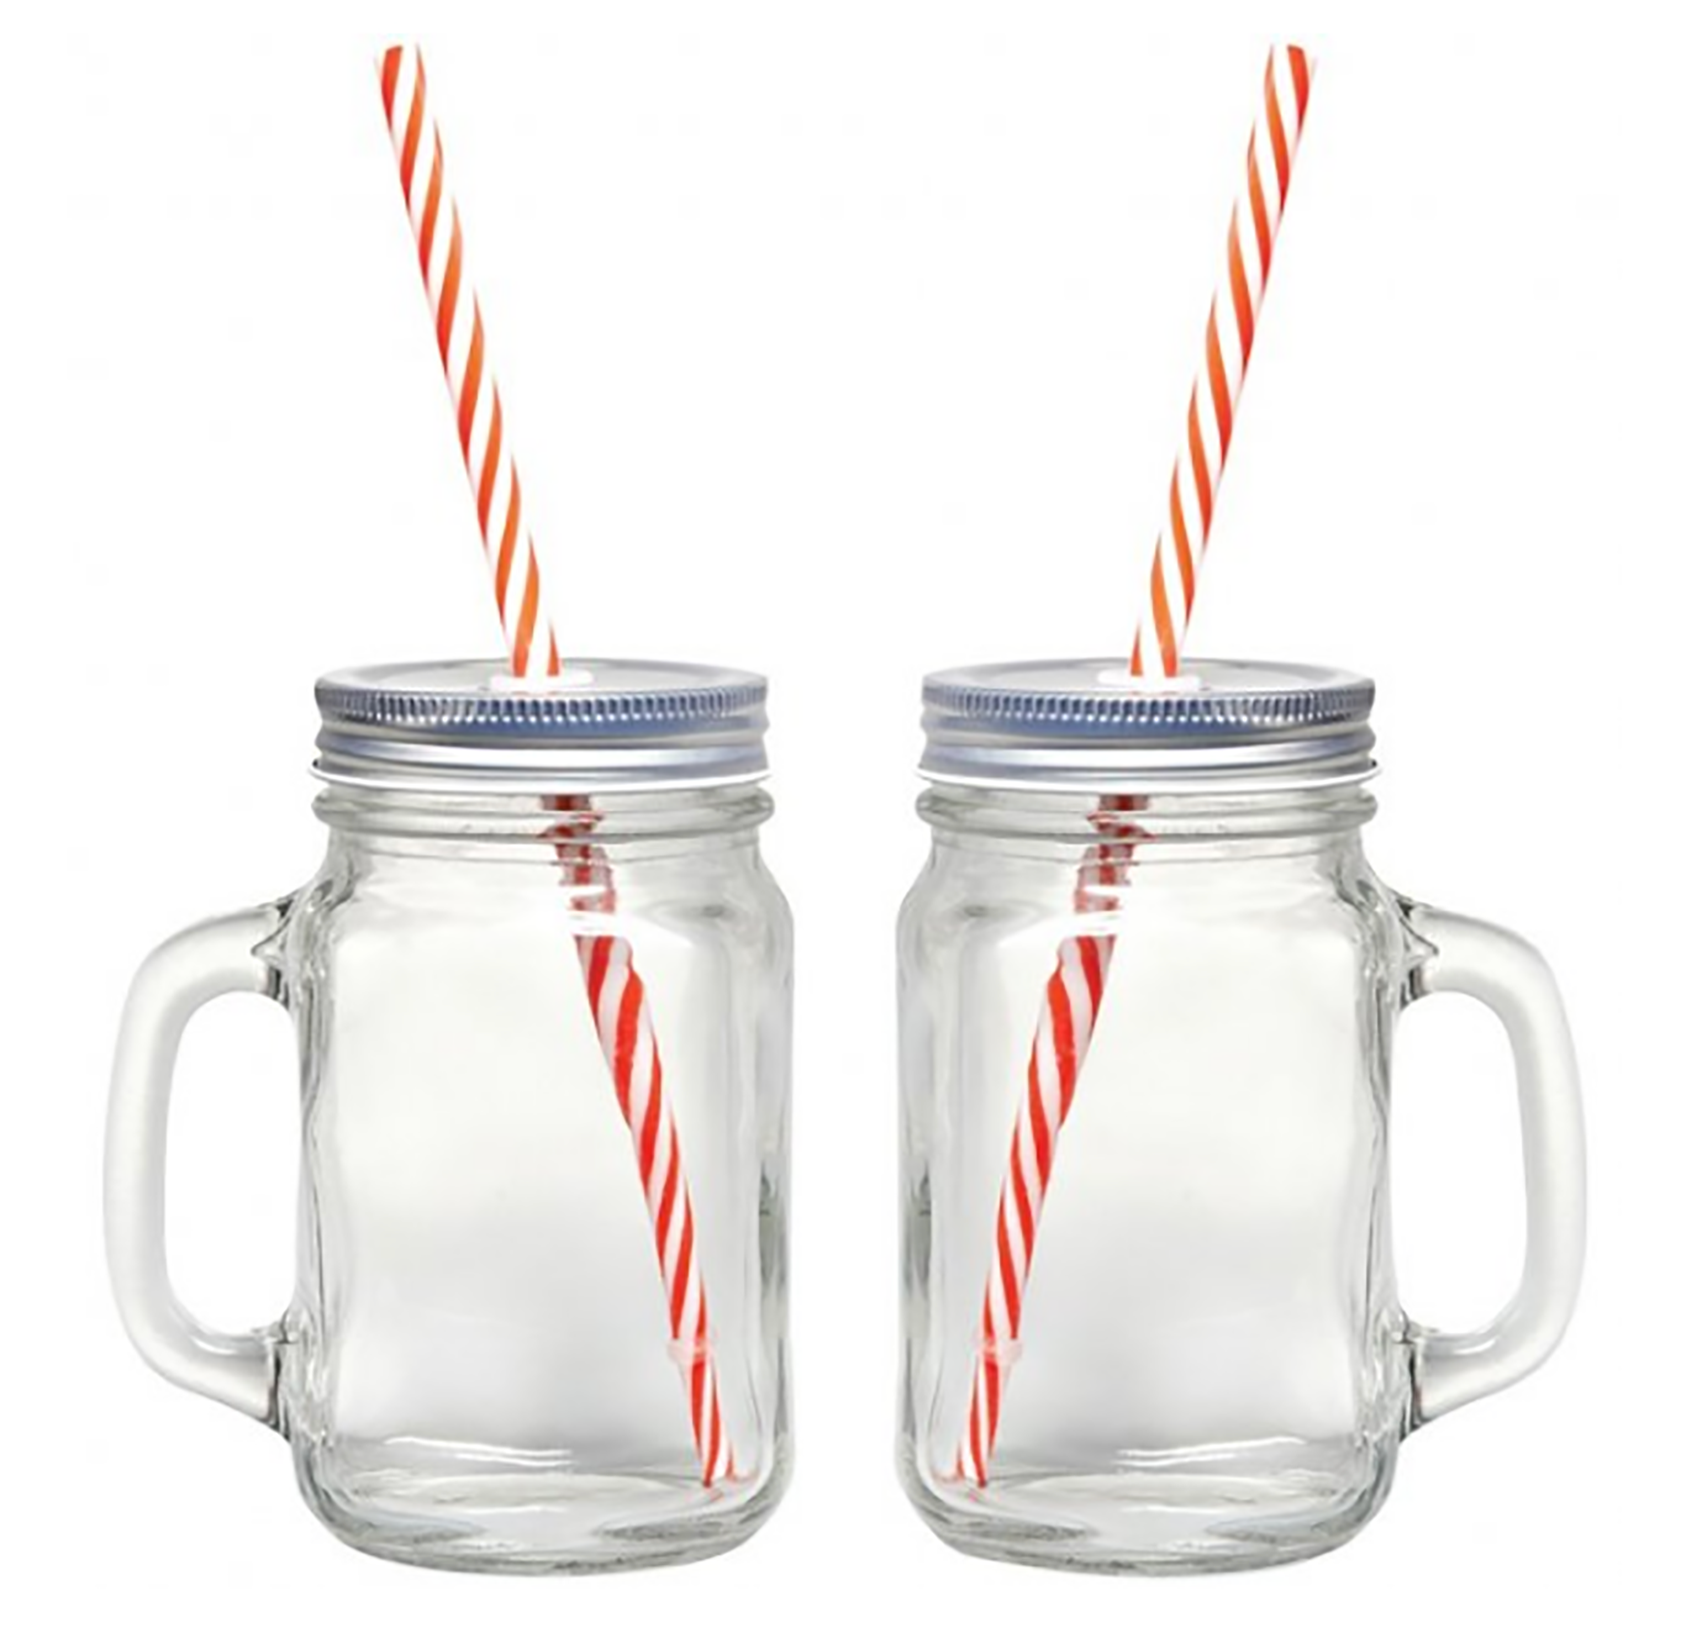 16oz Mason Jars with Lids and Straws Reusable for Party Smoothies  Transparent DIY Drinking Glass Mug with Handles - China Mason Jar, Mason  Jars with Lid